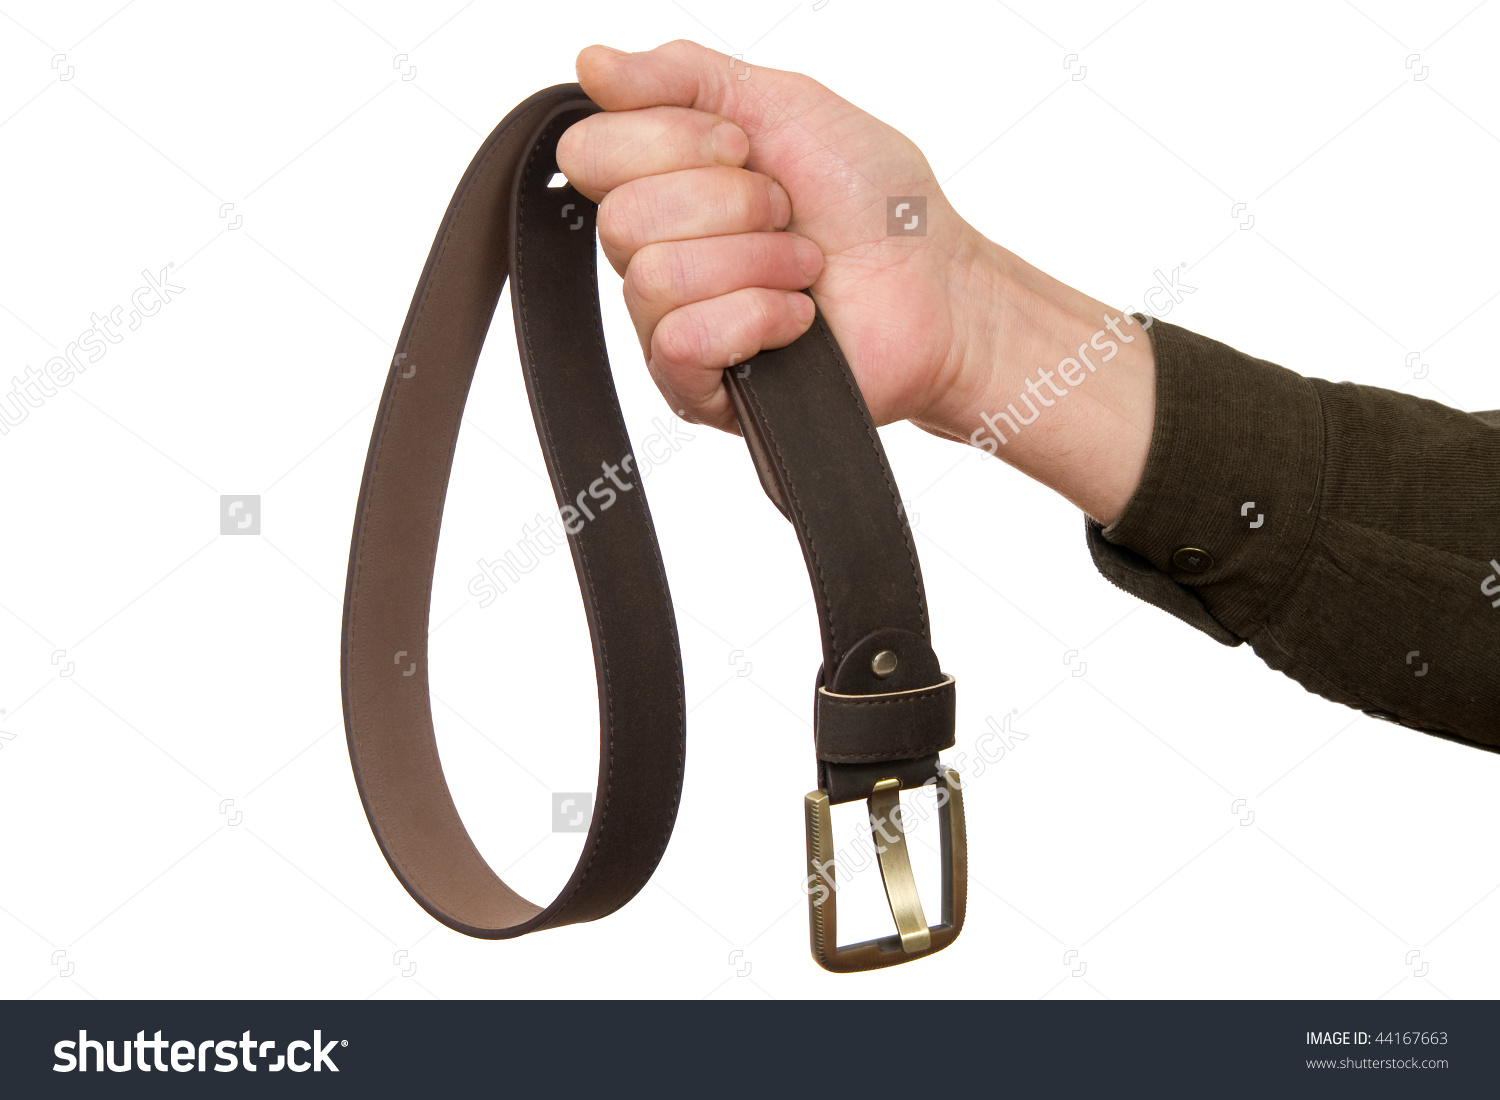 stock-photo-the-man-s-hand-holding-a-leather-belt-44167663.jpg